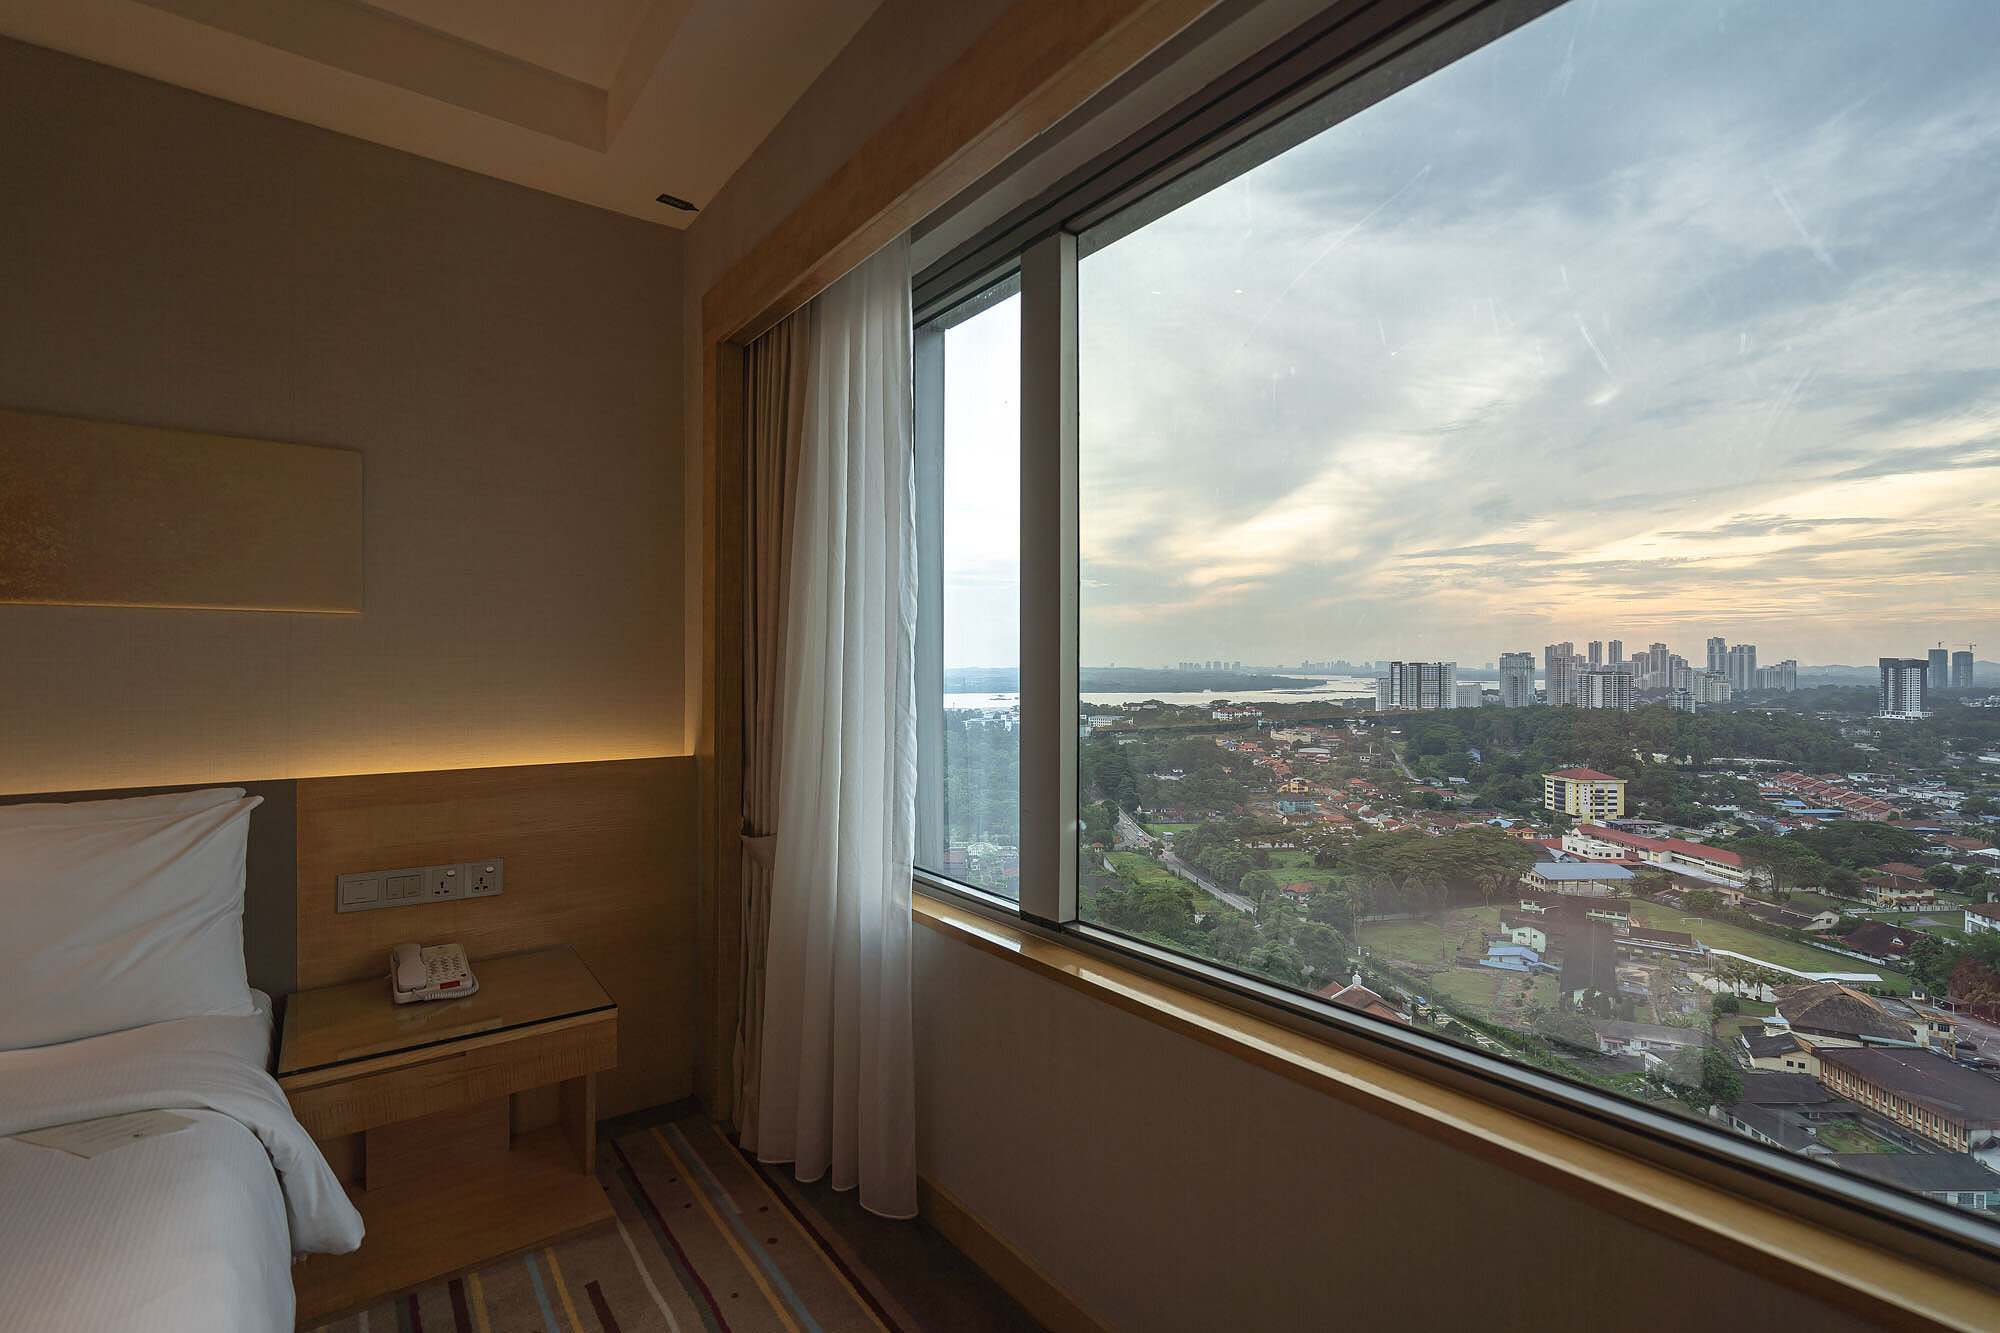 View of the sunset (and Singapore) from the bedroom